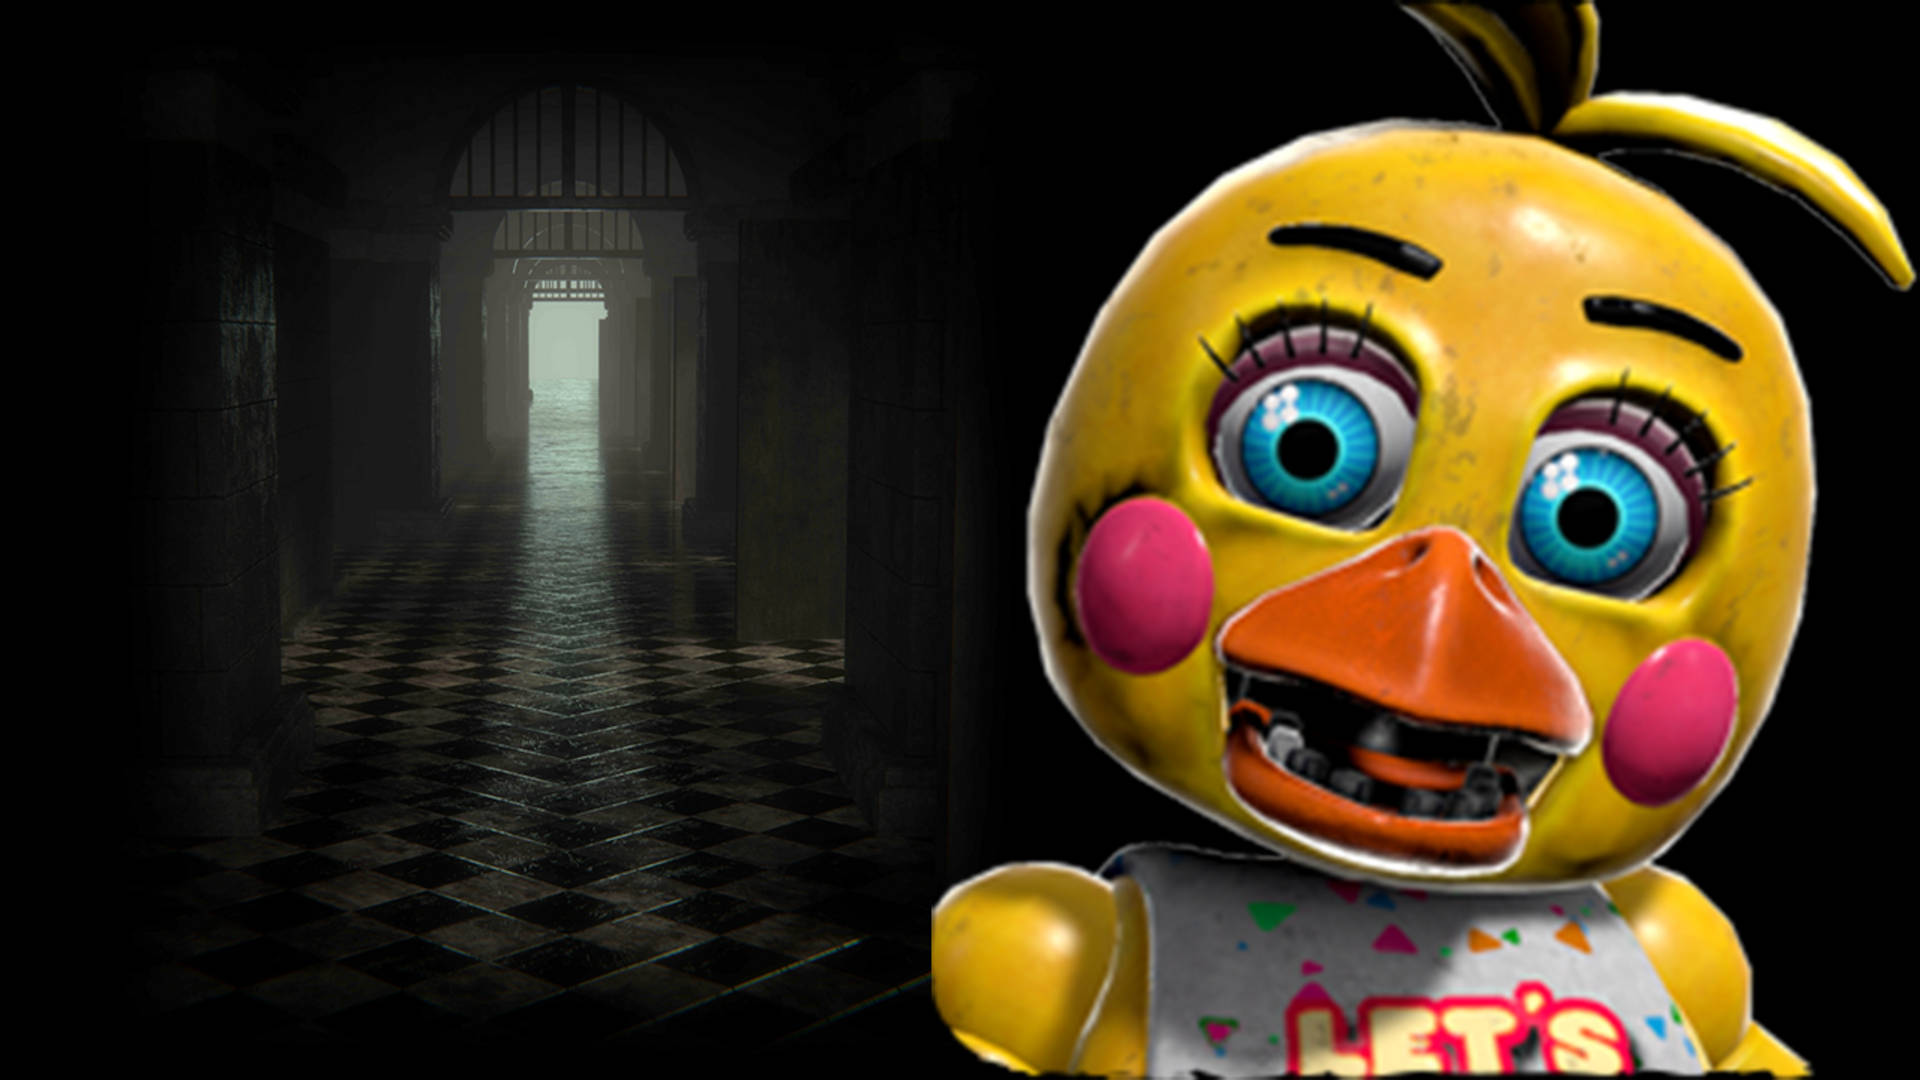 Intriguing scene of Toy Chica navigating through a dark hallway in FNAF. Shrouded in mystery with stunning details. Wallpaper